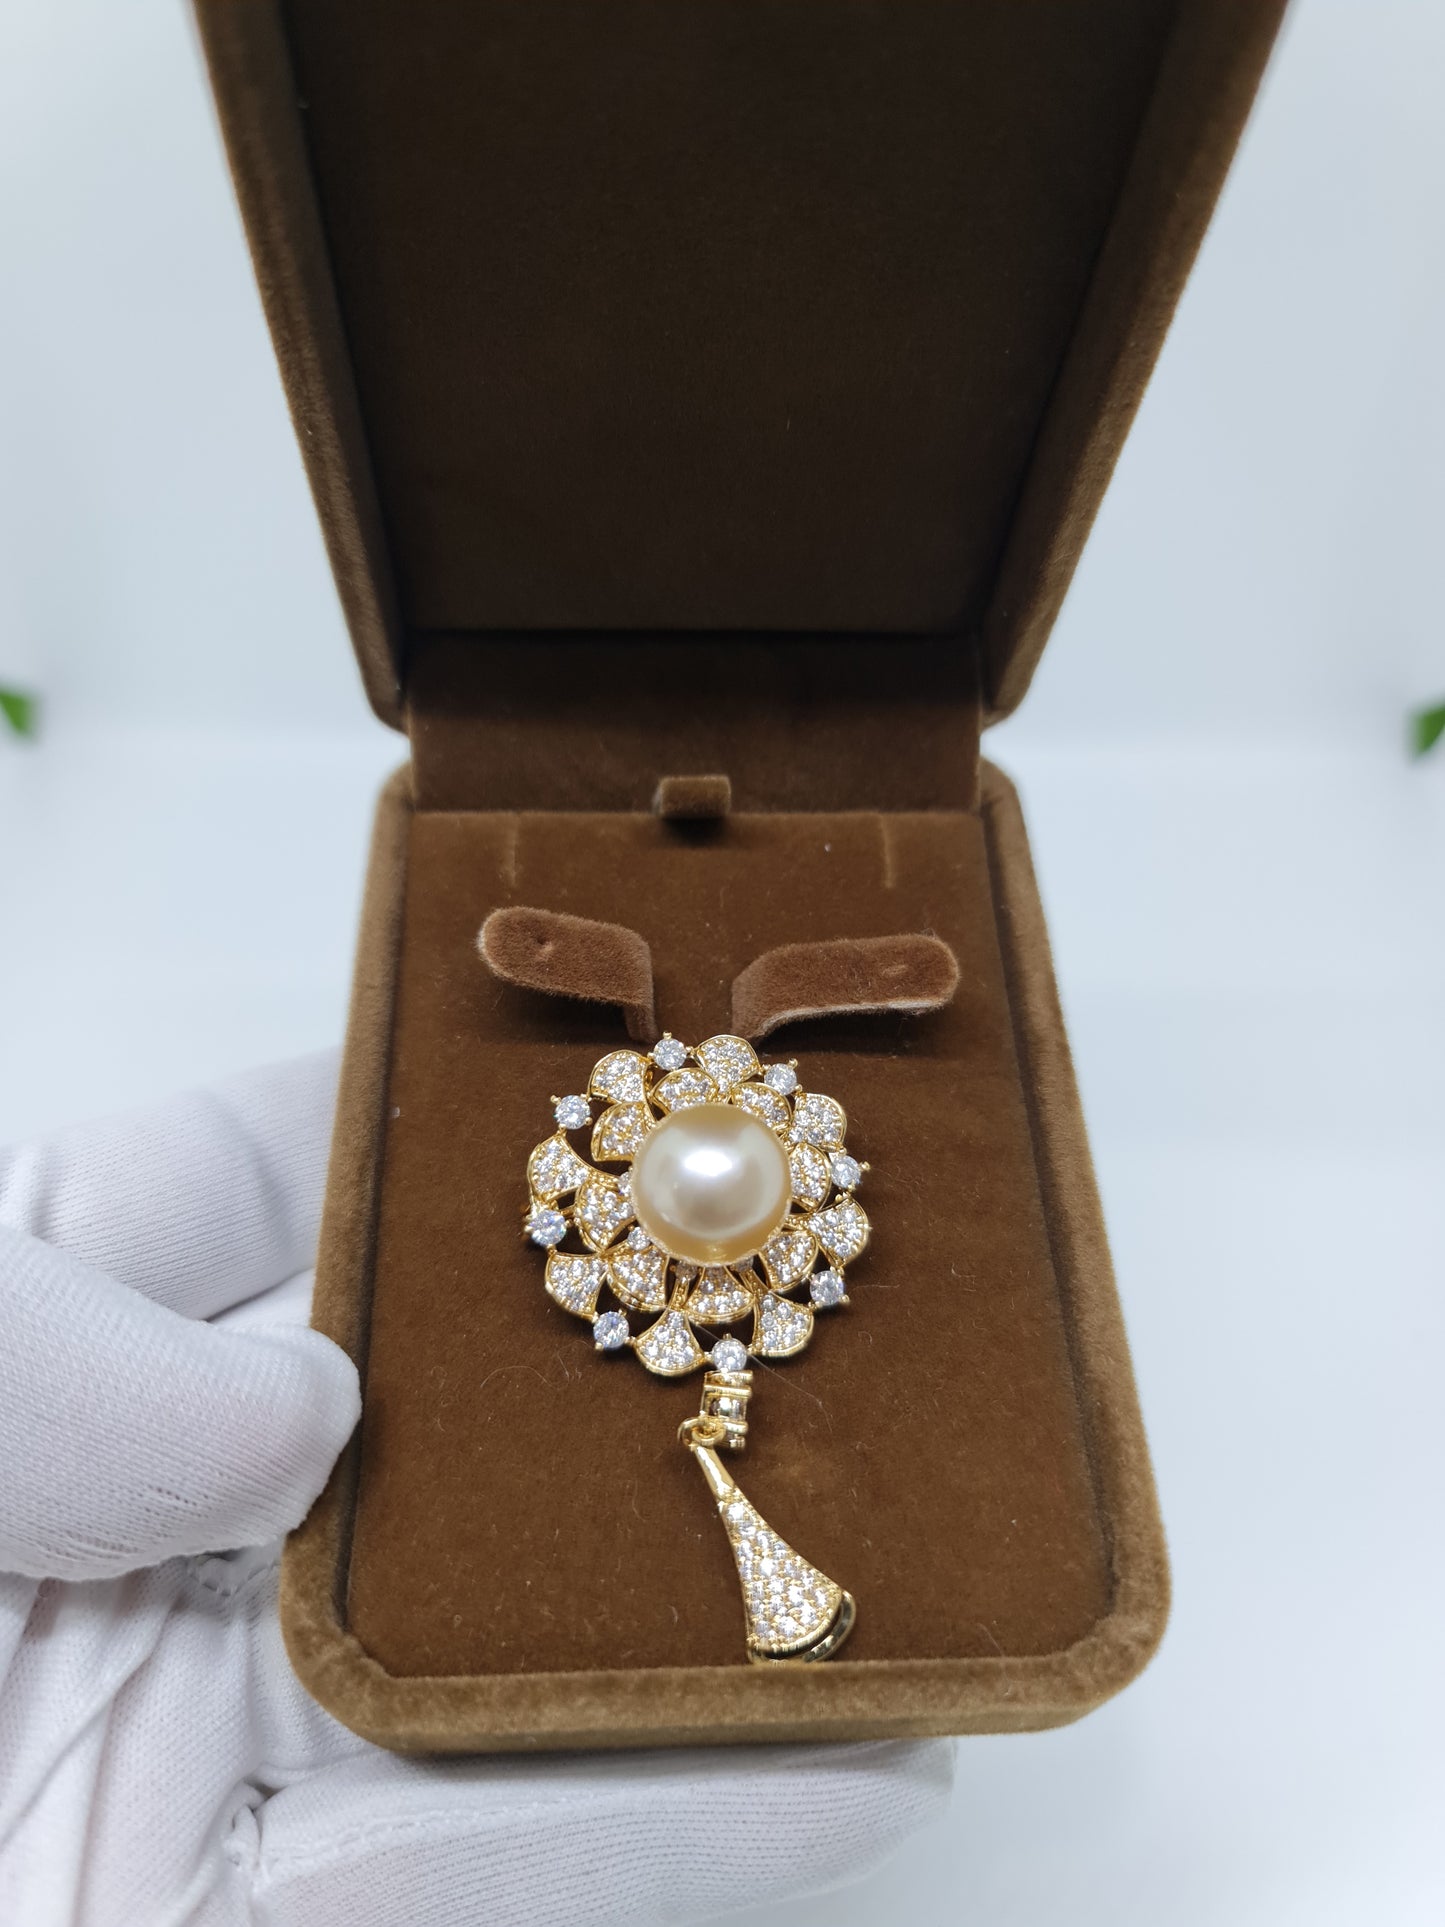 14mm Champagne South Sea Pearls Brooch Pendant Plated